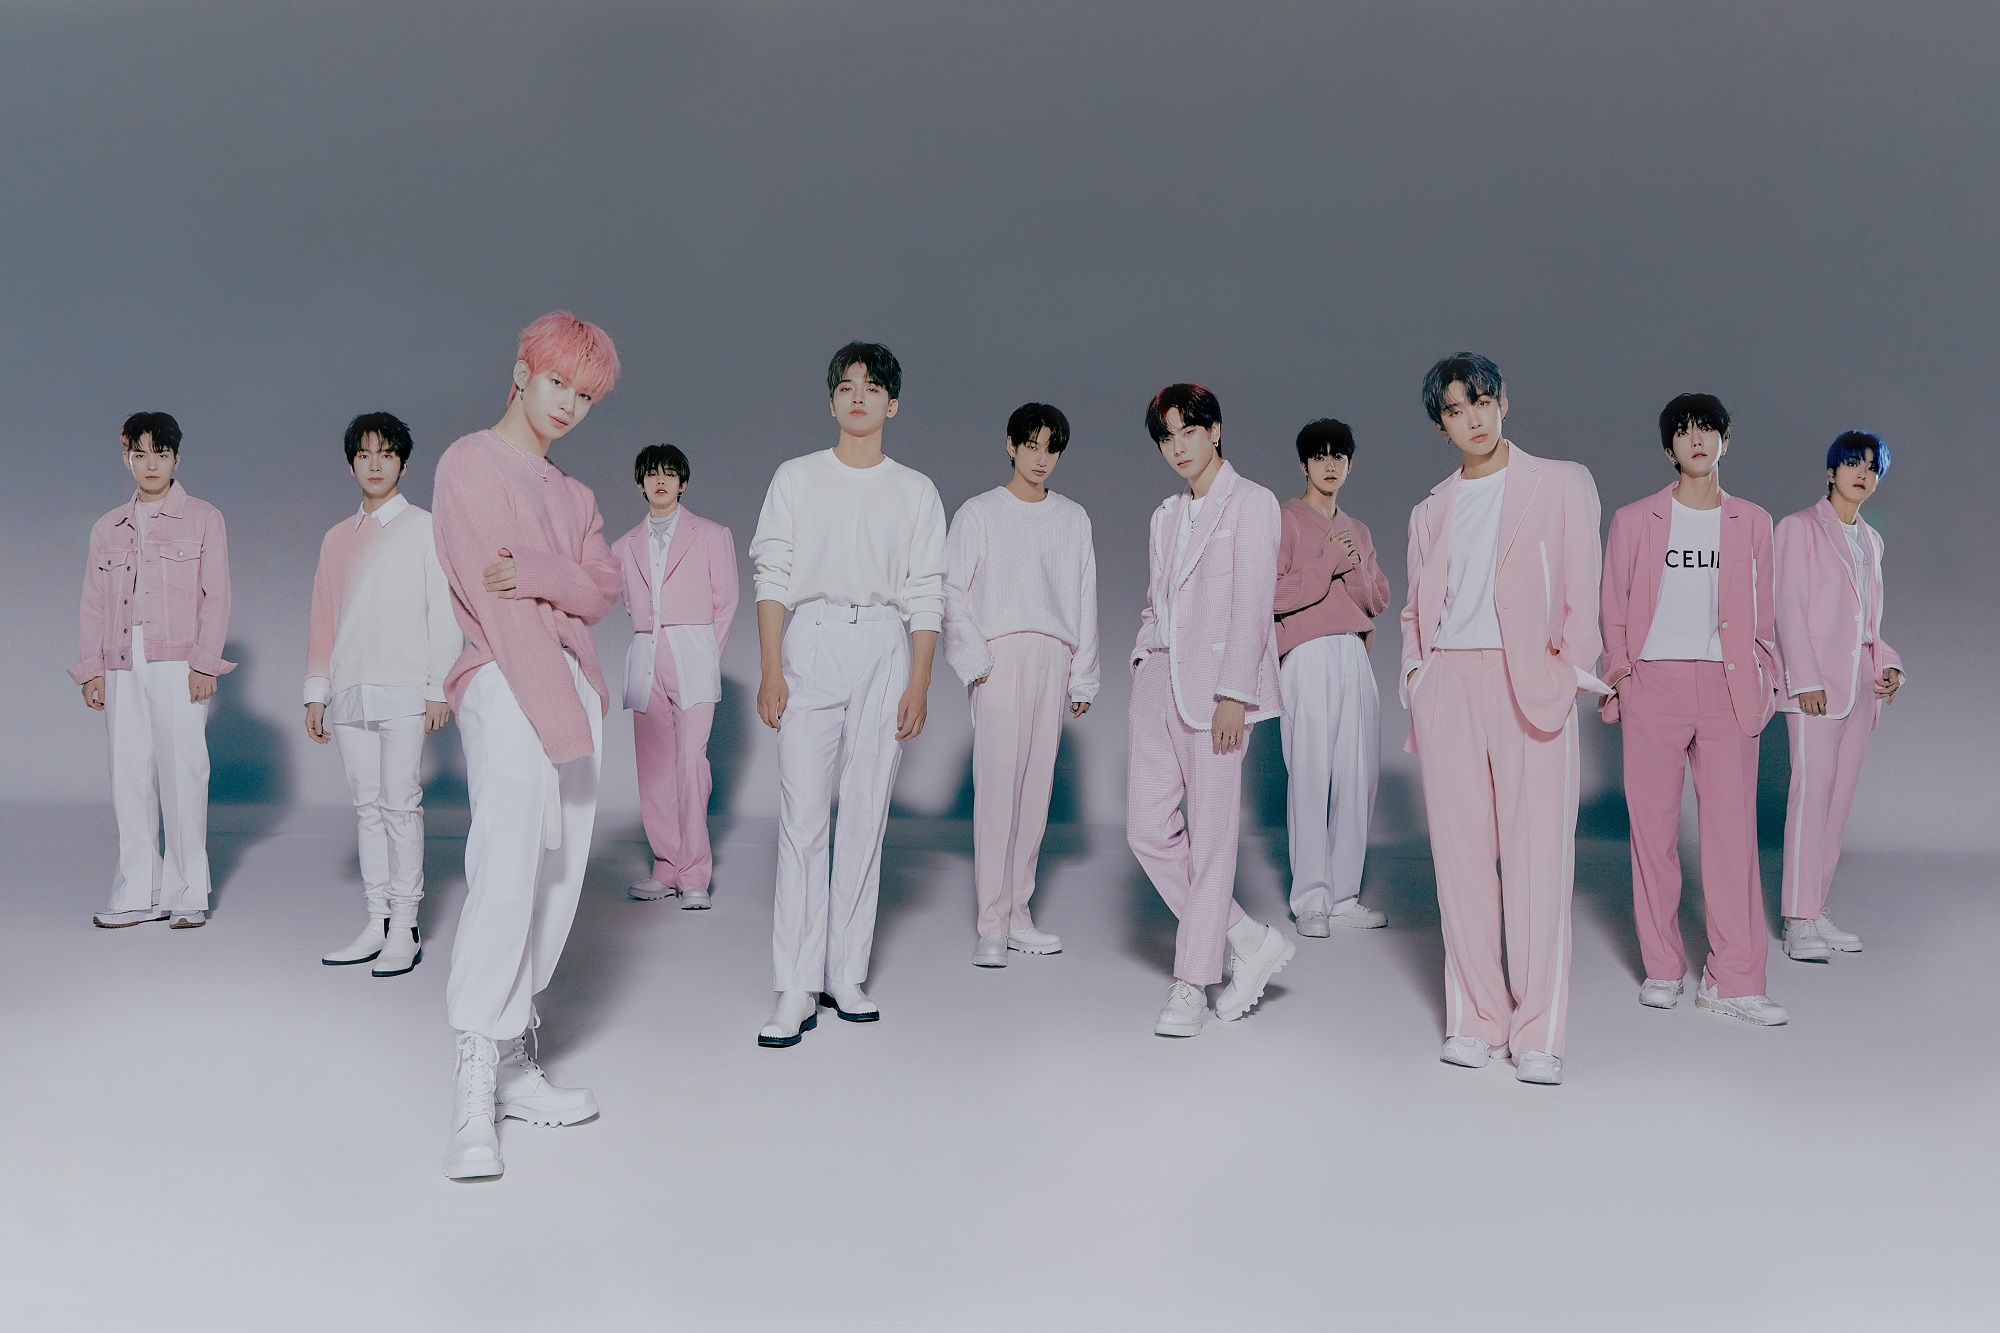 The members of K-pop group Omega X stand in a gray room wearing pink clothes for a promotional photo